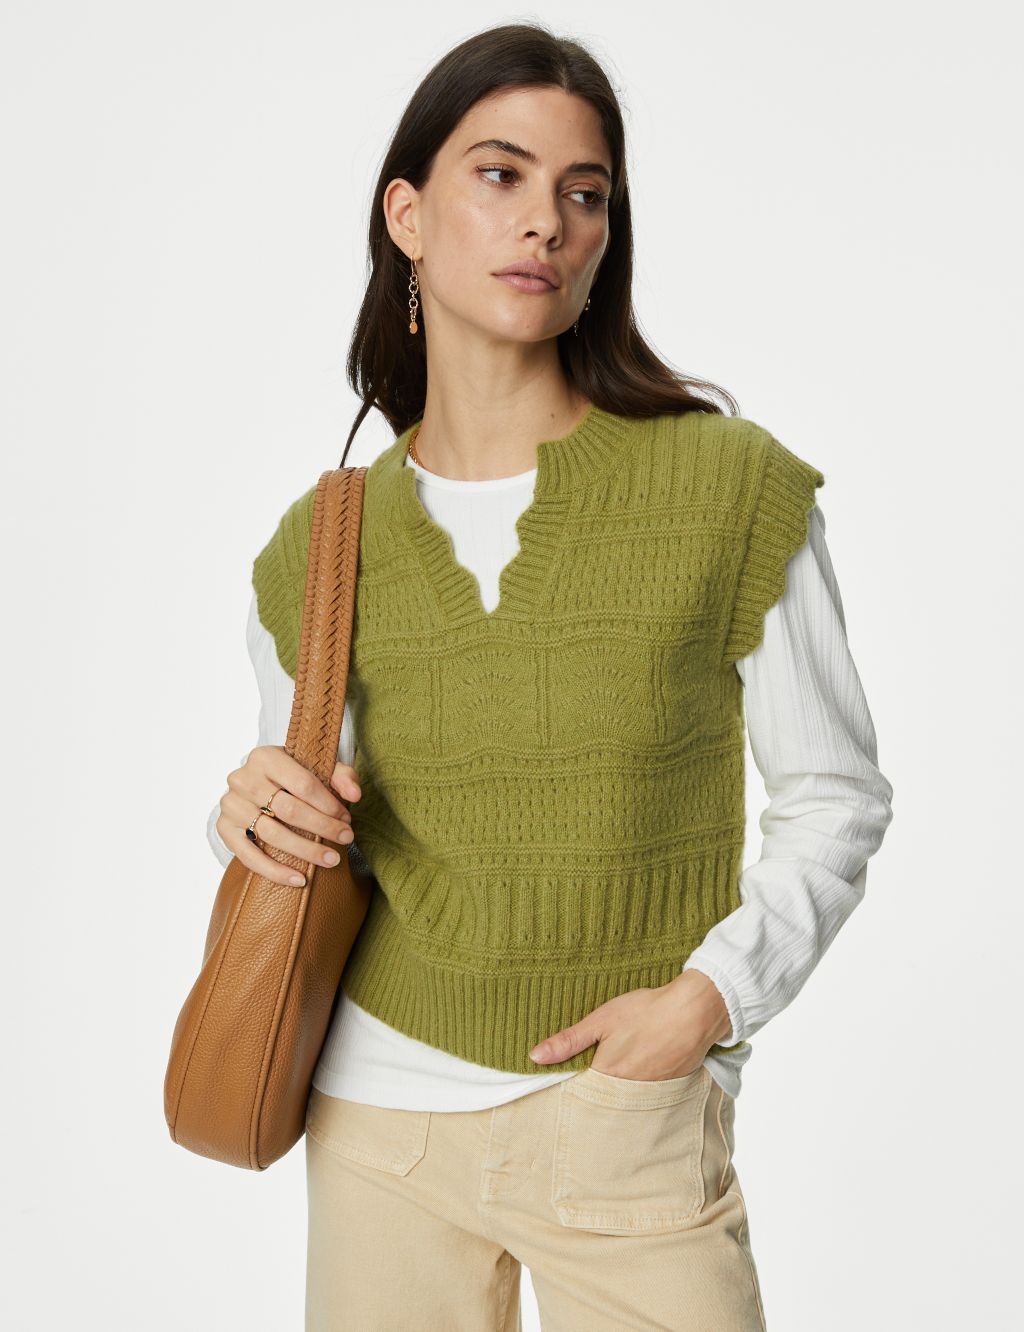 Notch Neck Knitted Vest with Wool image 1